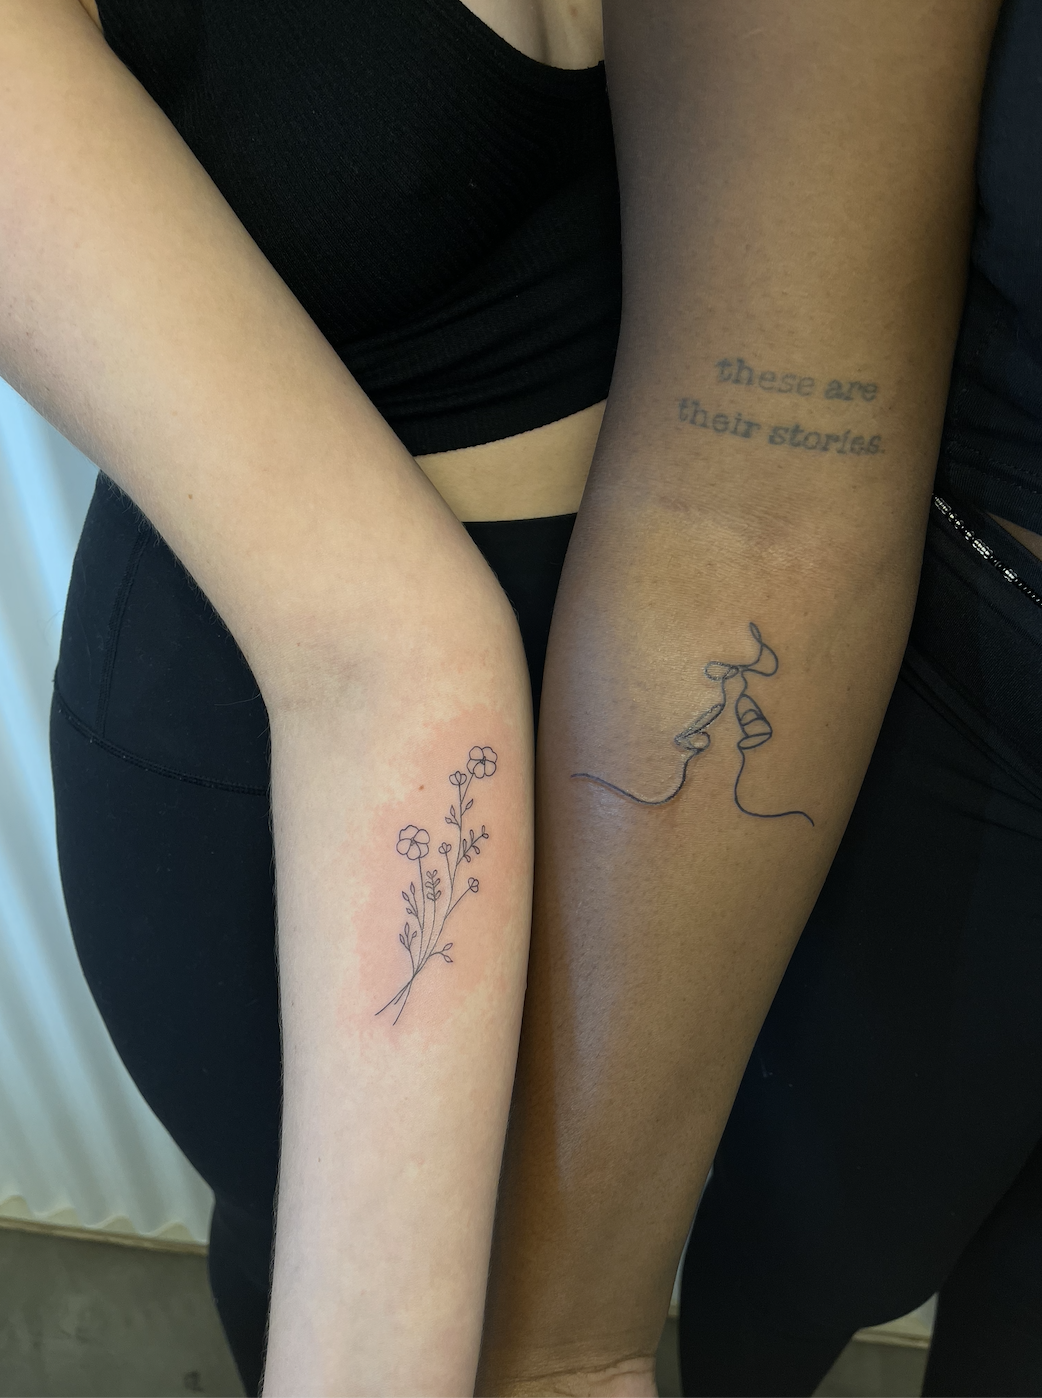 Shelby showing off a floral tat and Ehis showing a line tat of two figures about to kiss